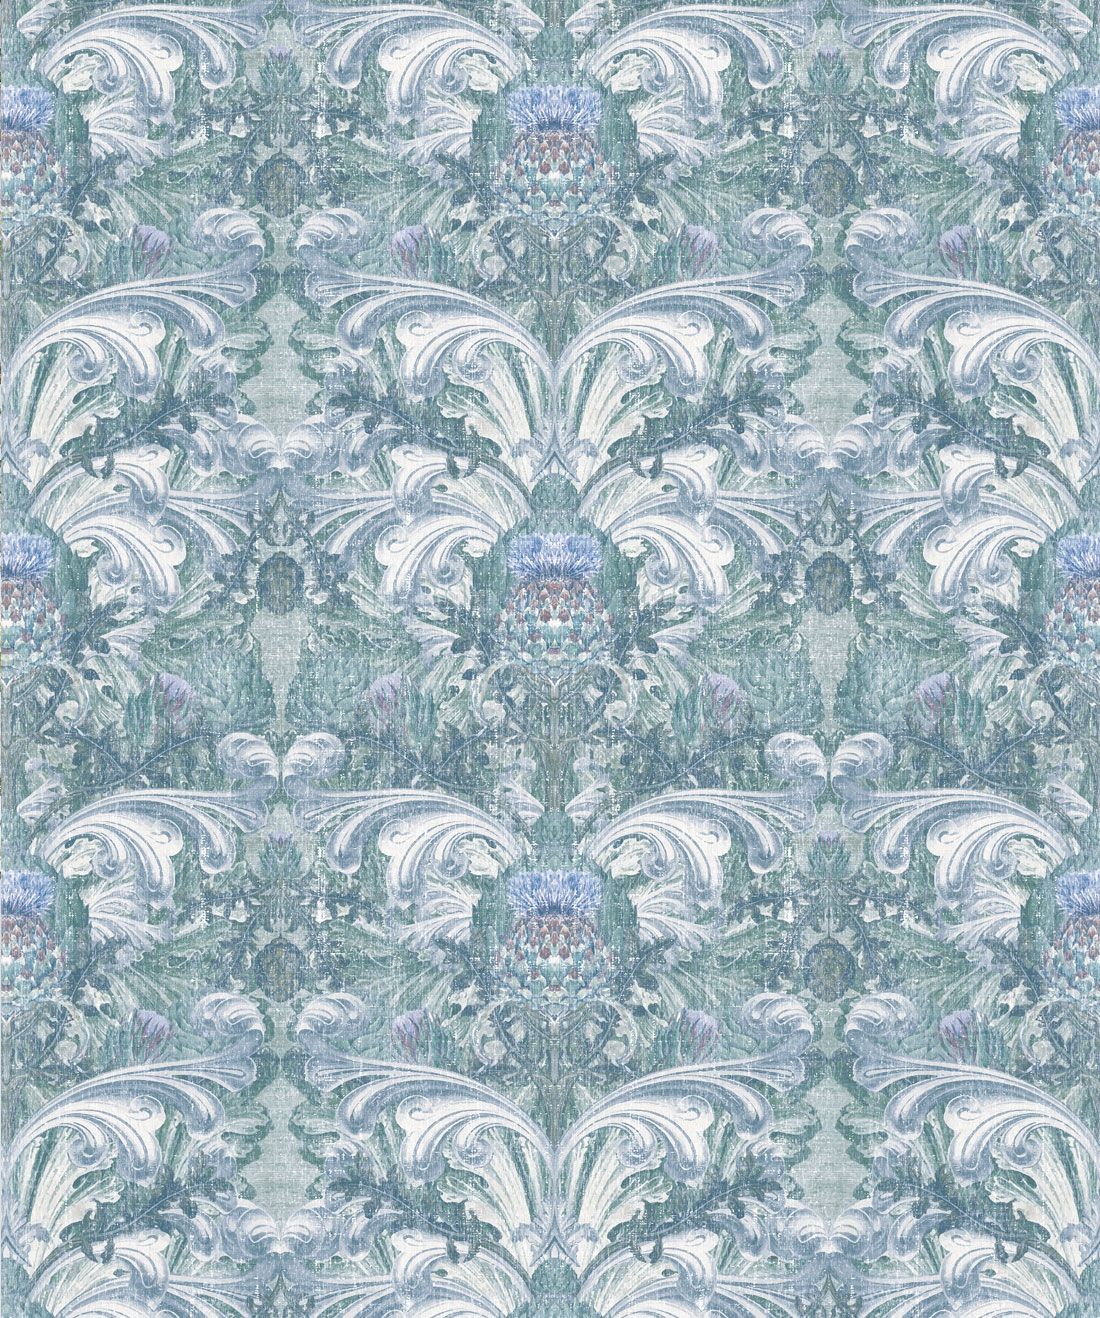 Thistle in Ashen is a Baroque Inspired Wallpaper